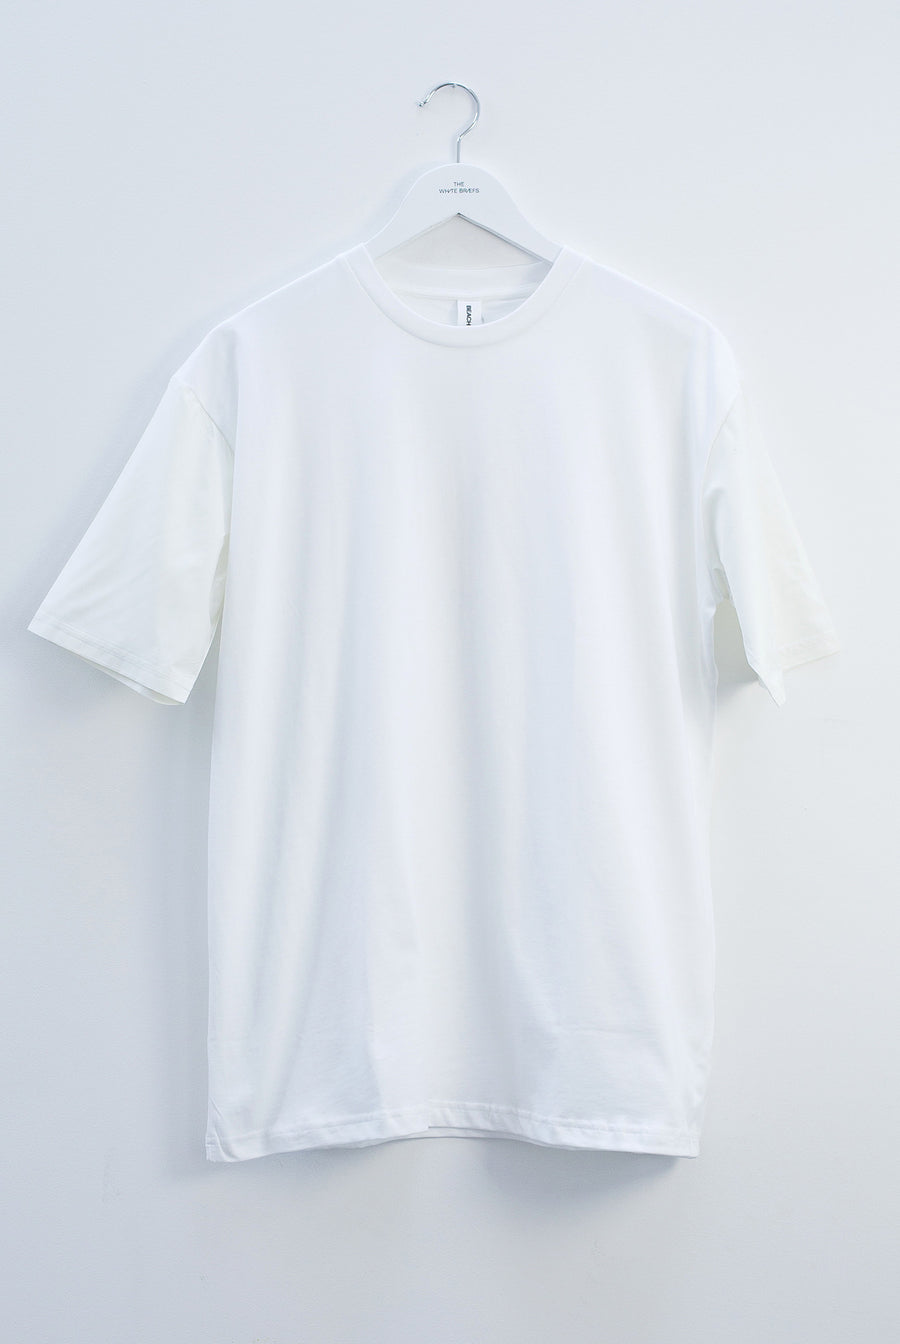 The White Briefs t-shirt in 100% organic cotton with recycled polyester sleeves